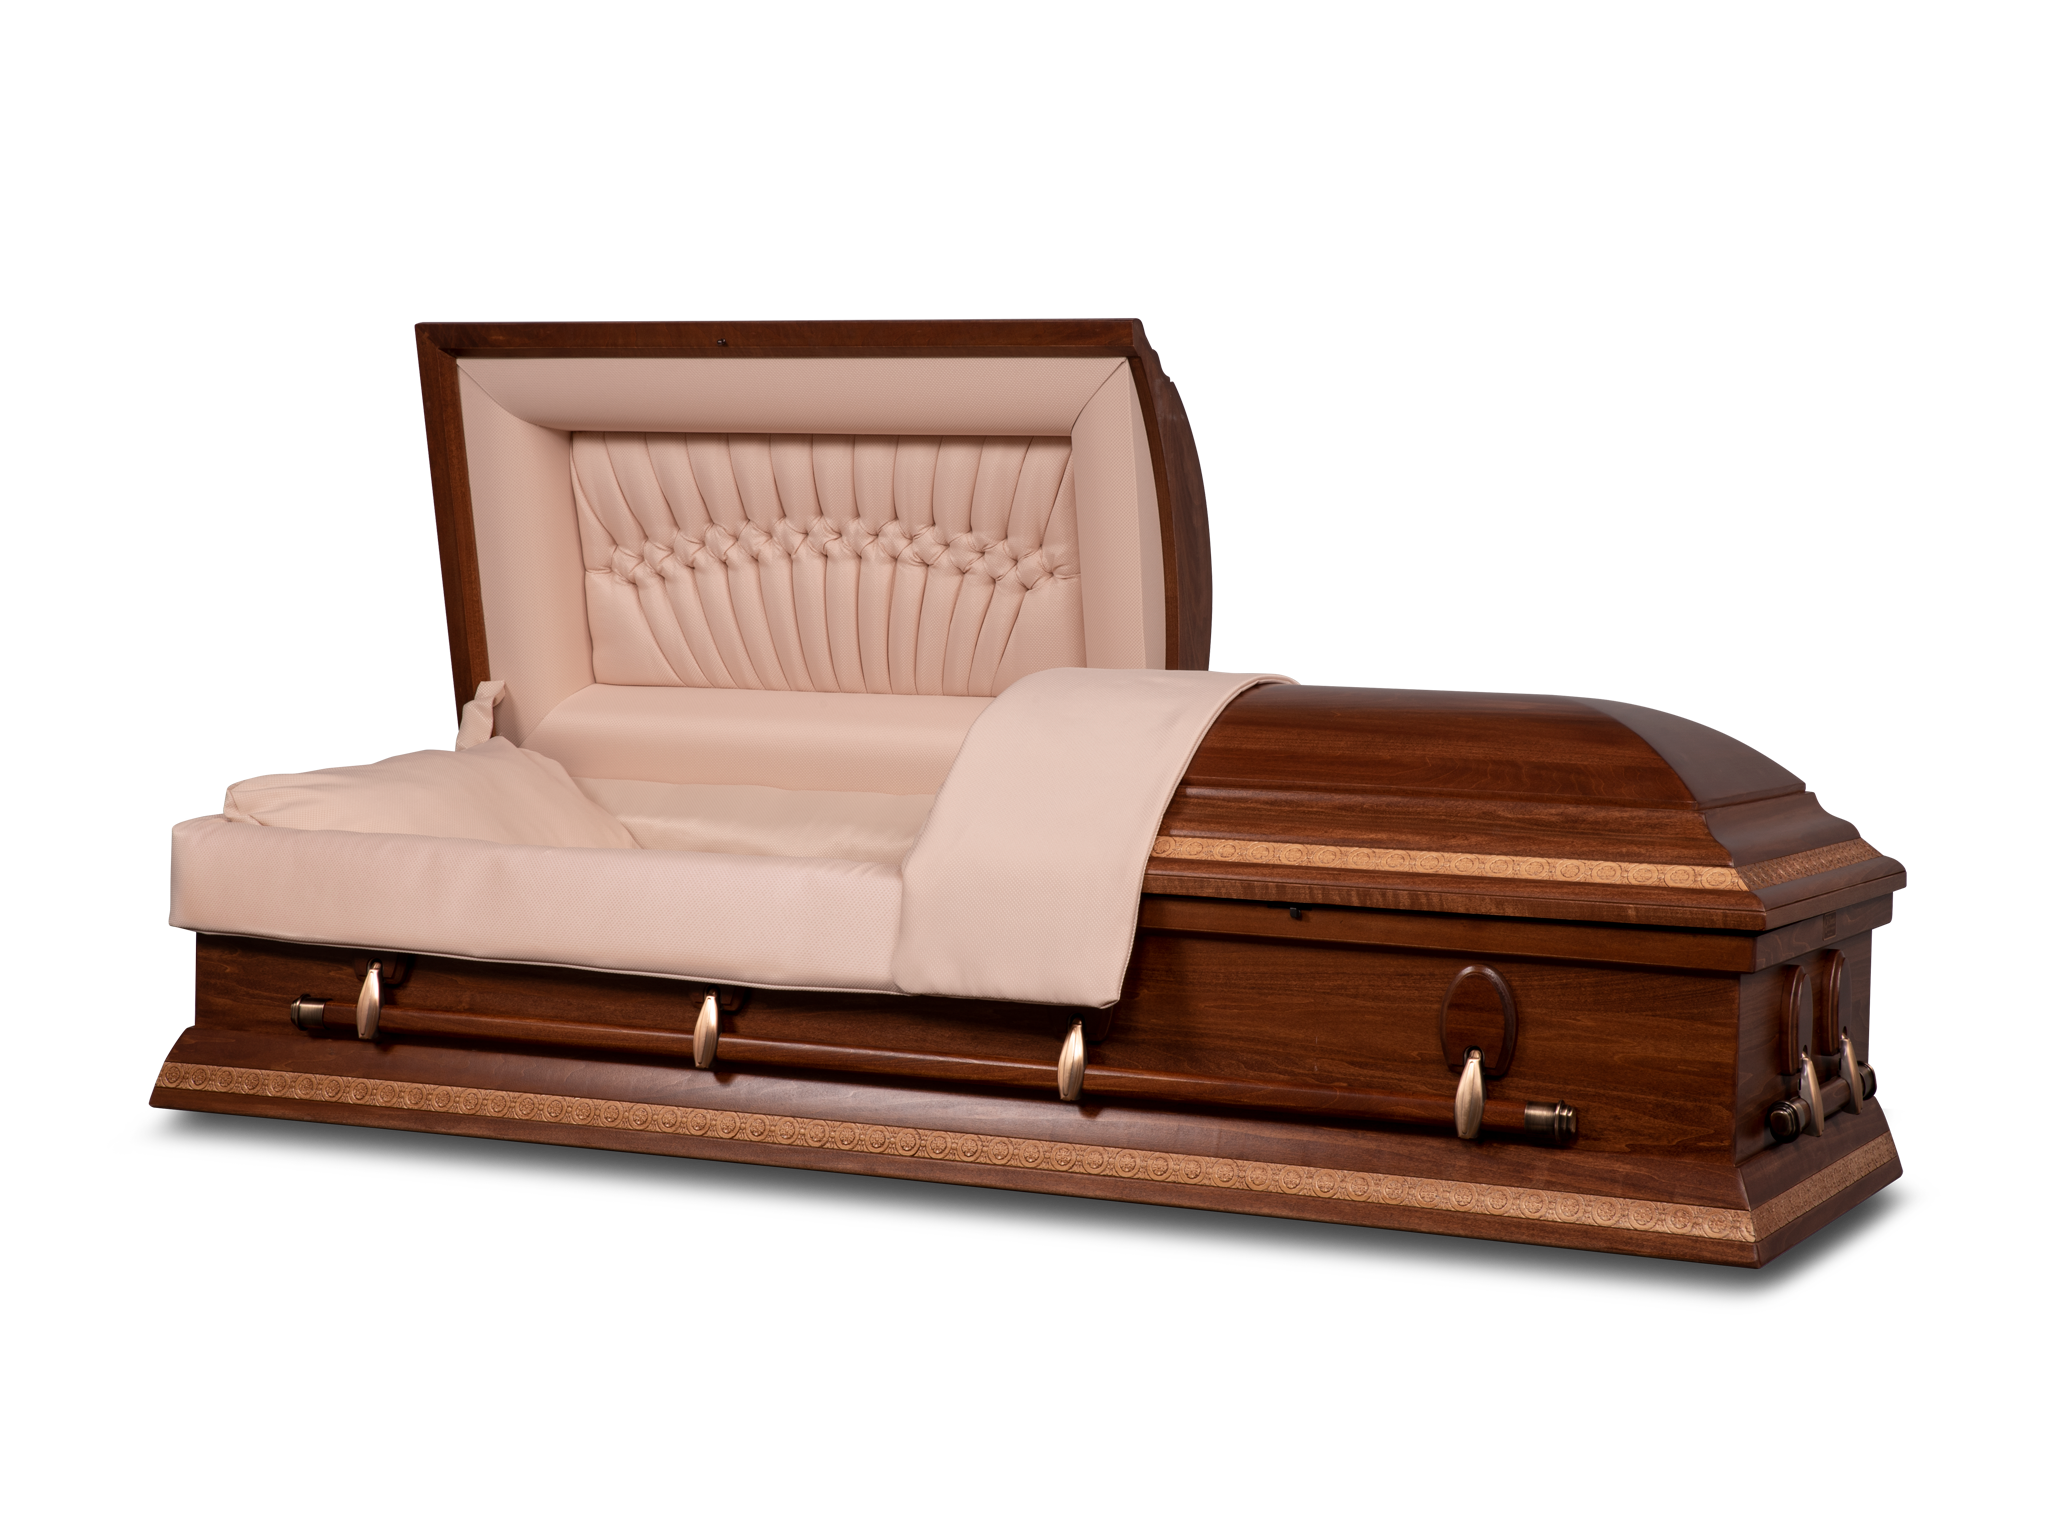 Hardwood burial casket made from select wood with a deep chestnut satin finish, displayed open with a crème brûlée basketweave tailored interior